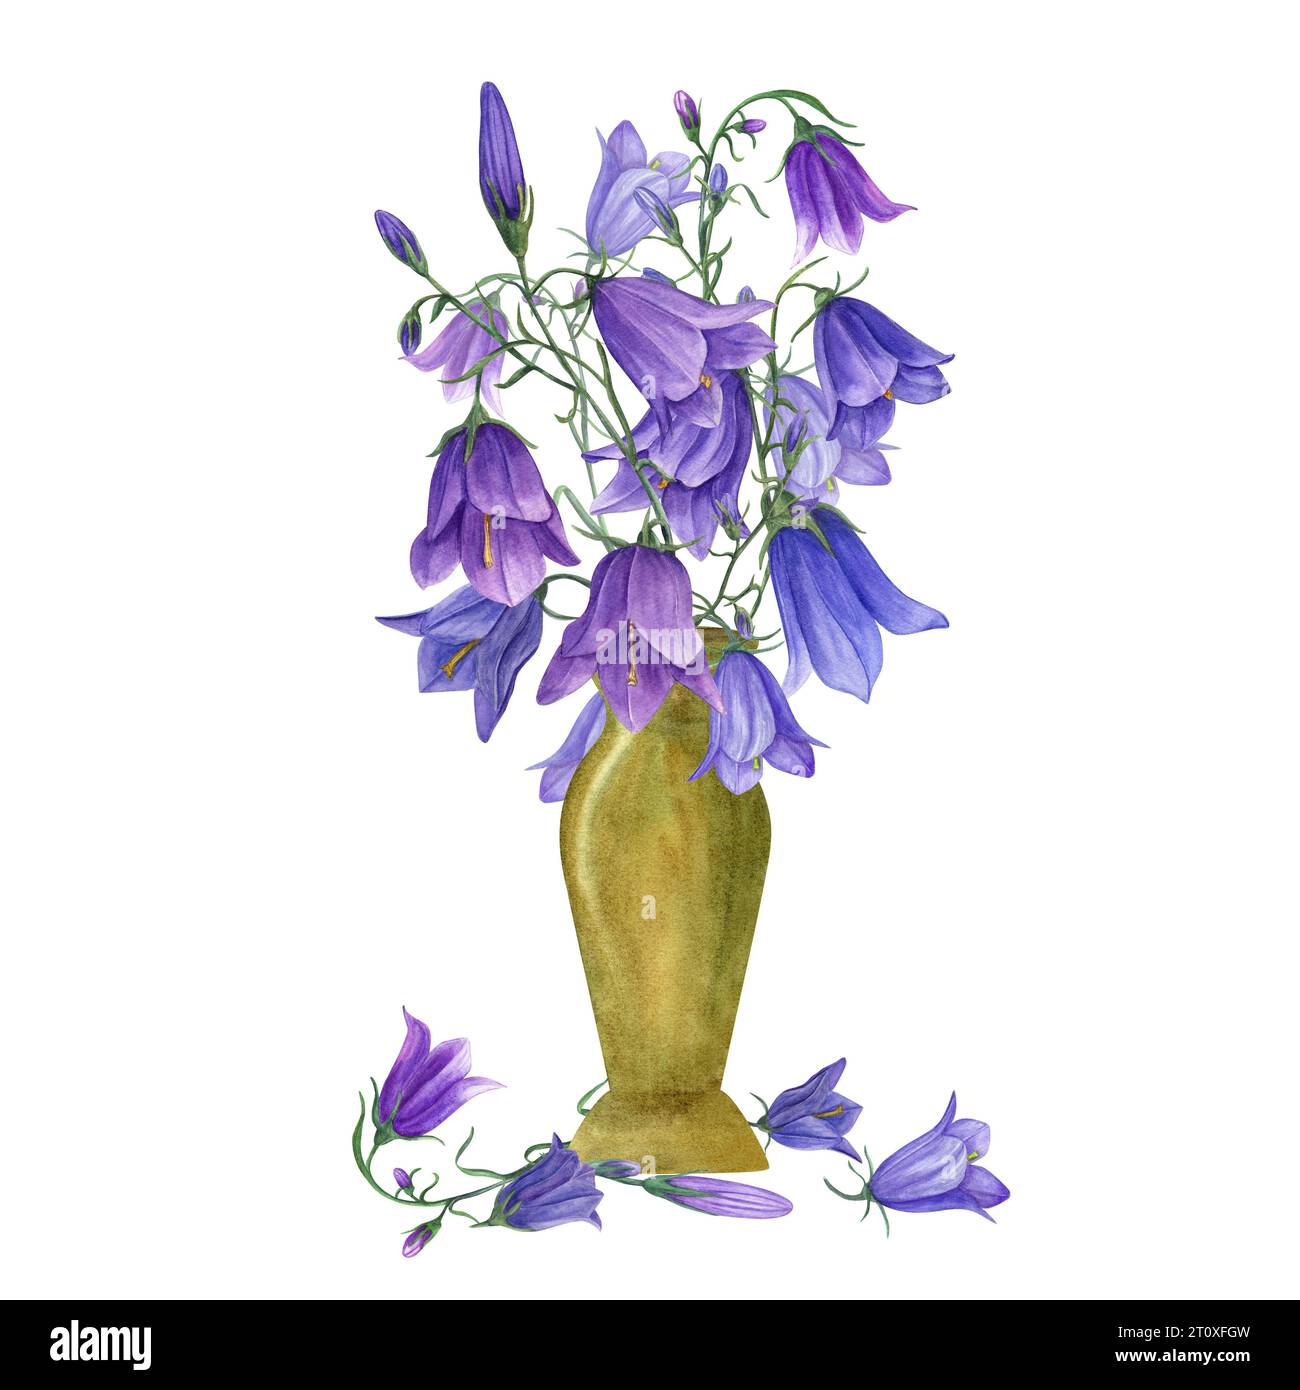 Floral bouquet in yellow ceramic pot. Campanula, harebell, bell flowers. Meadow plants in vase for interior decor, for label, logo, greetings Stock Photo